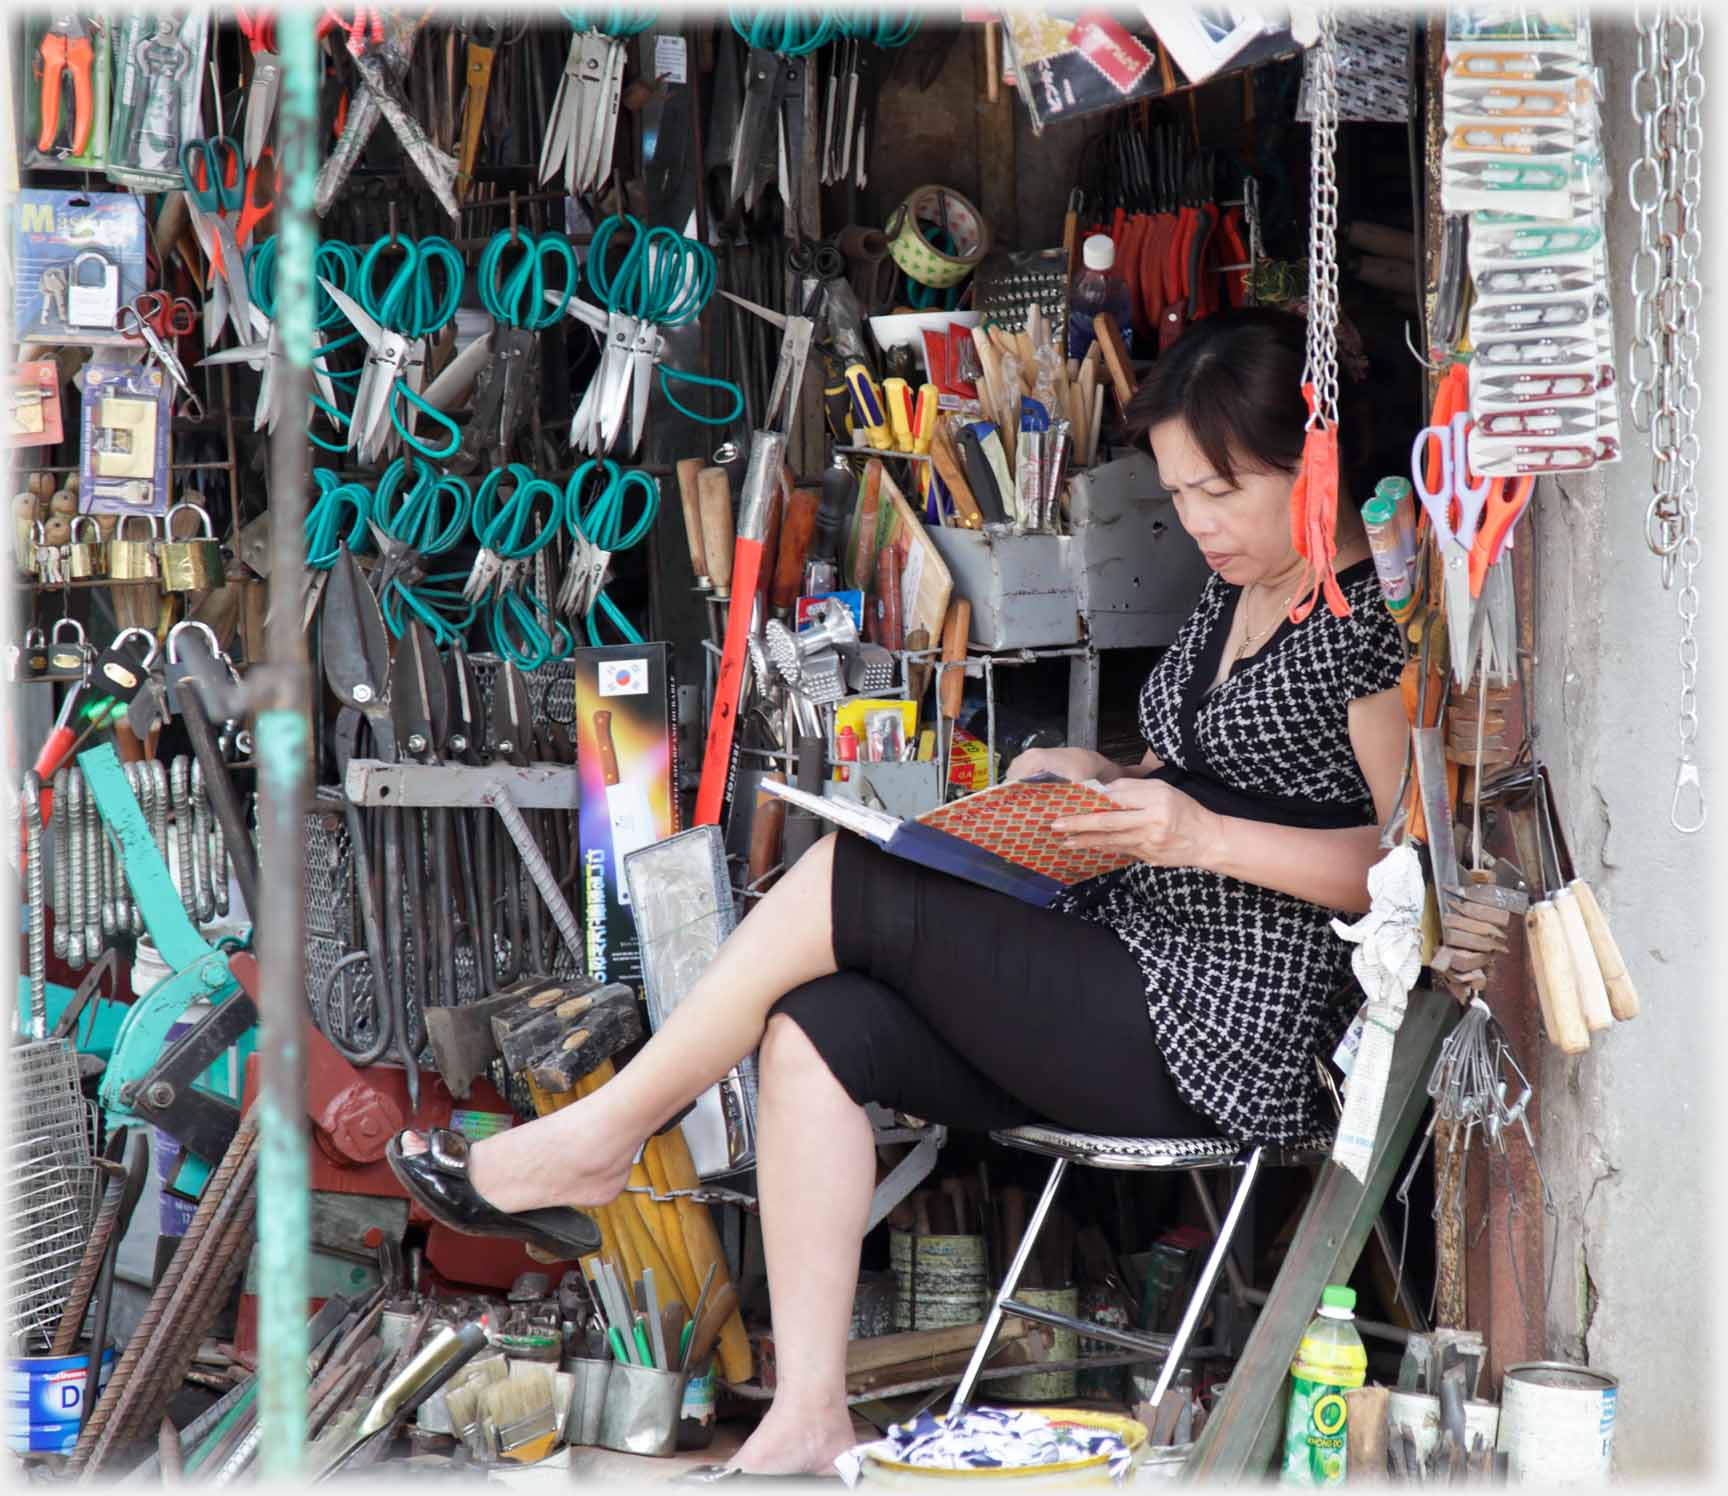 Woman sitting in small shop frowning at open note book.